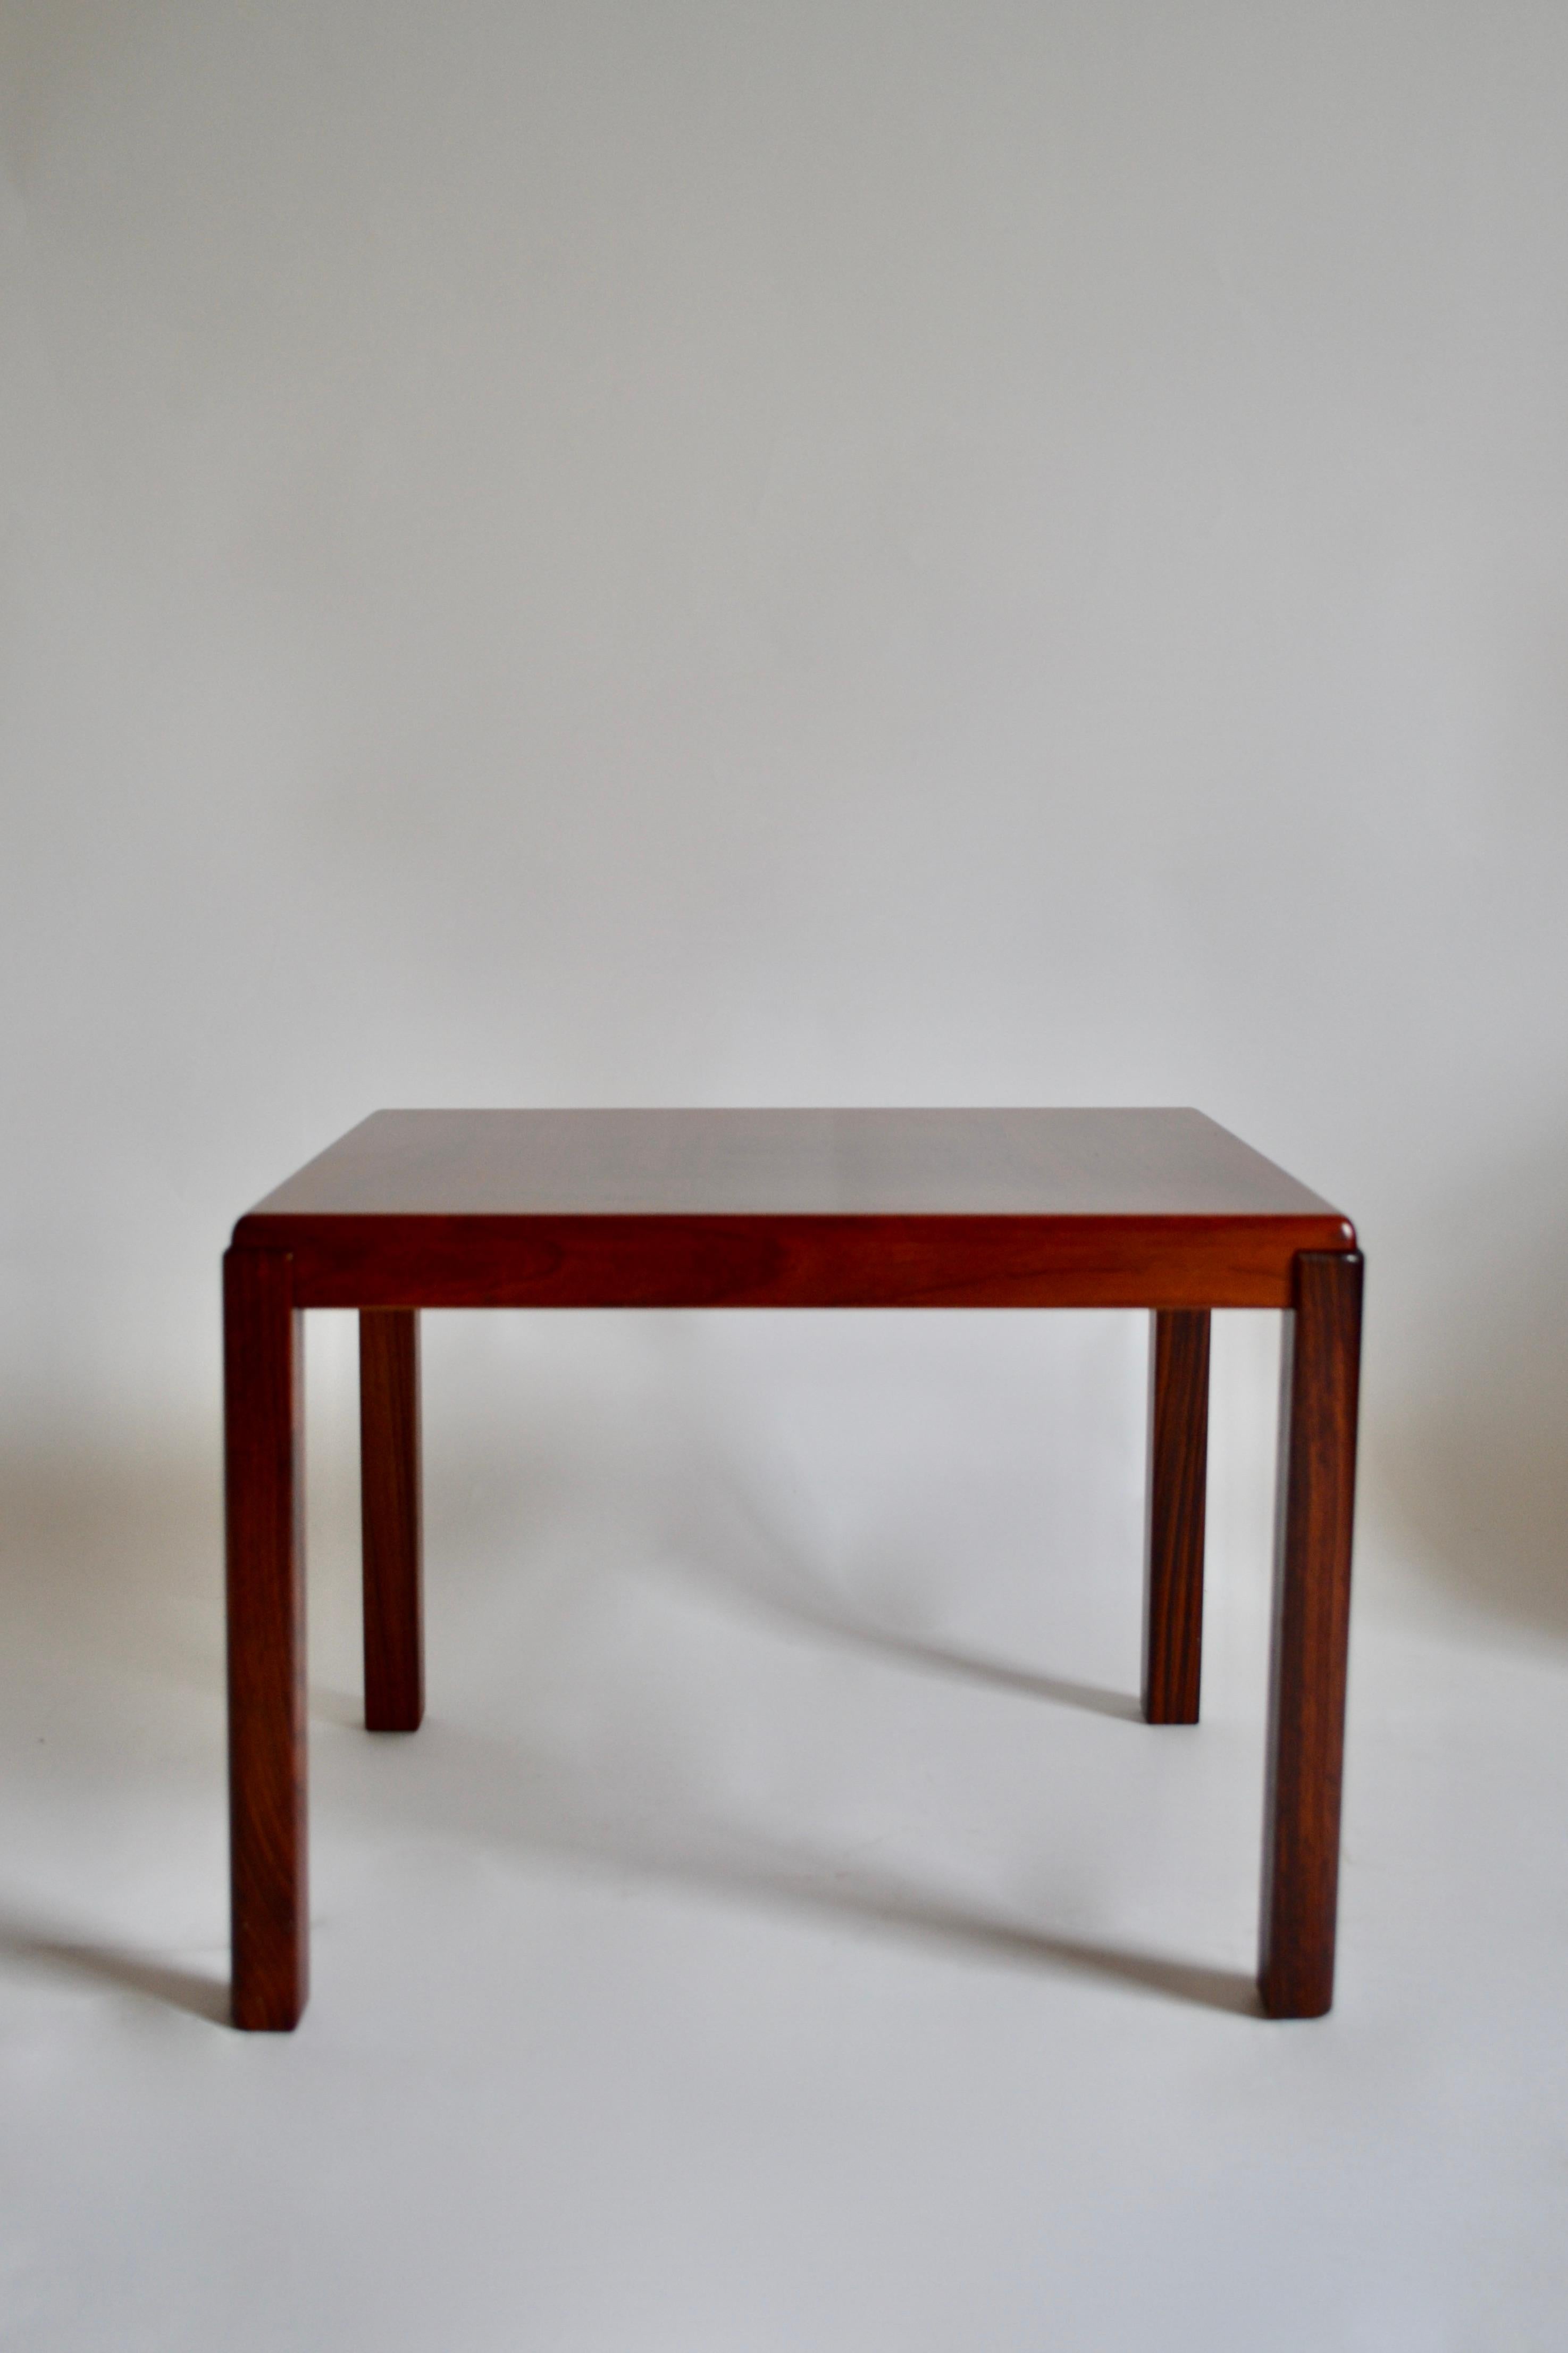 1960s rosewood side / occasional table designed and made in Denmark by Vejle Stole & Møbelfabrik. Makers stamp on underside of table.